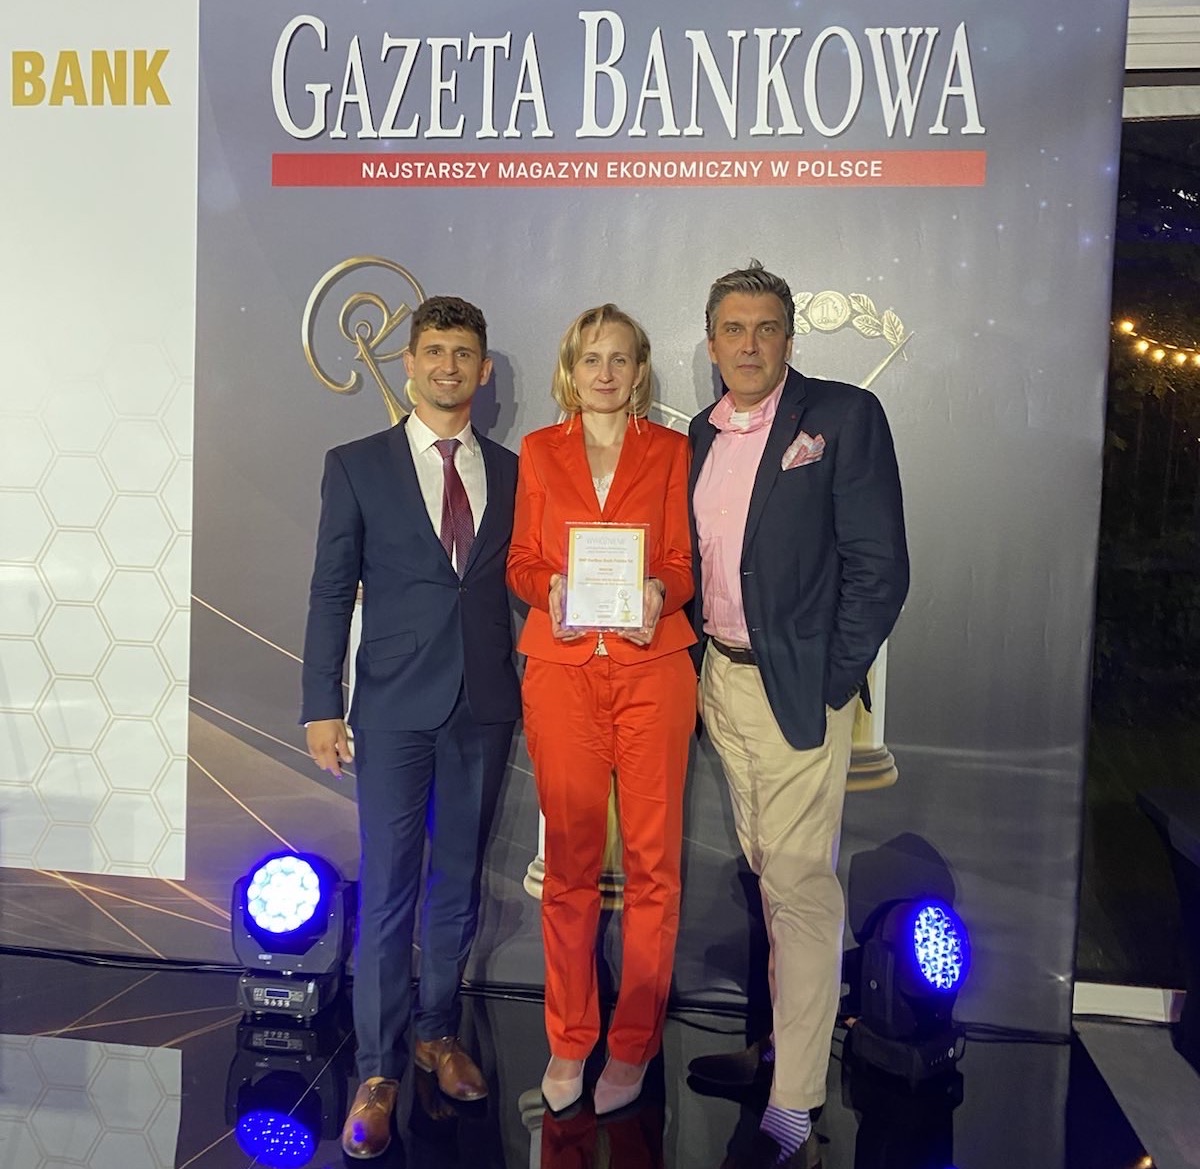 BNP Paribas Bank Polska awarded in the "Leader" competition of Gazeta Bankowa for implementing Secfense USer Access Security Broker.